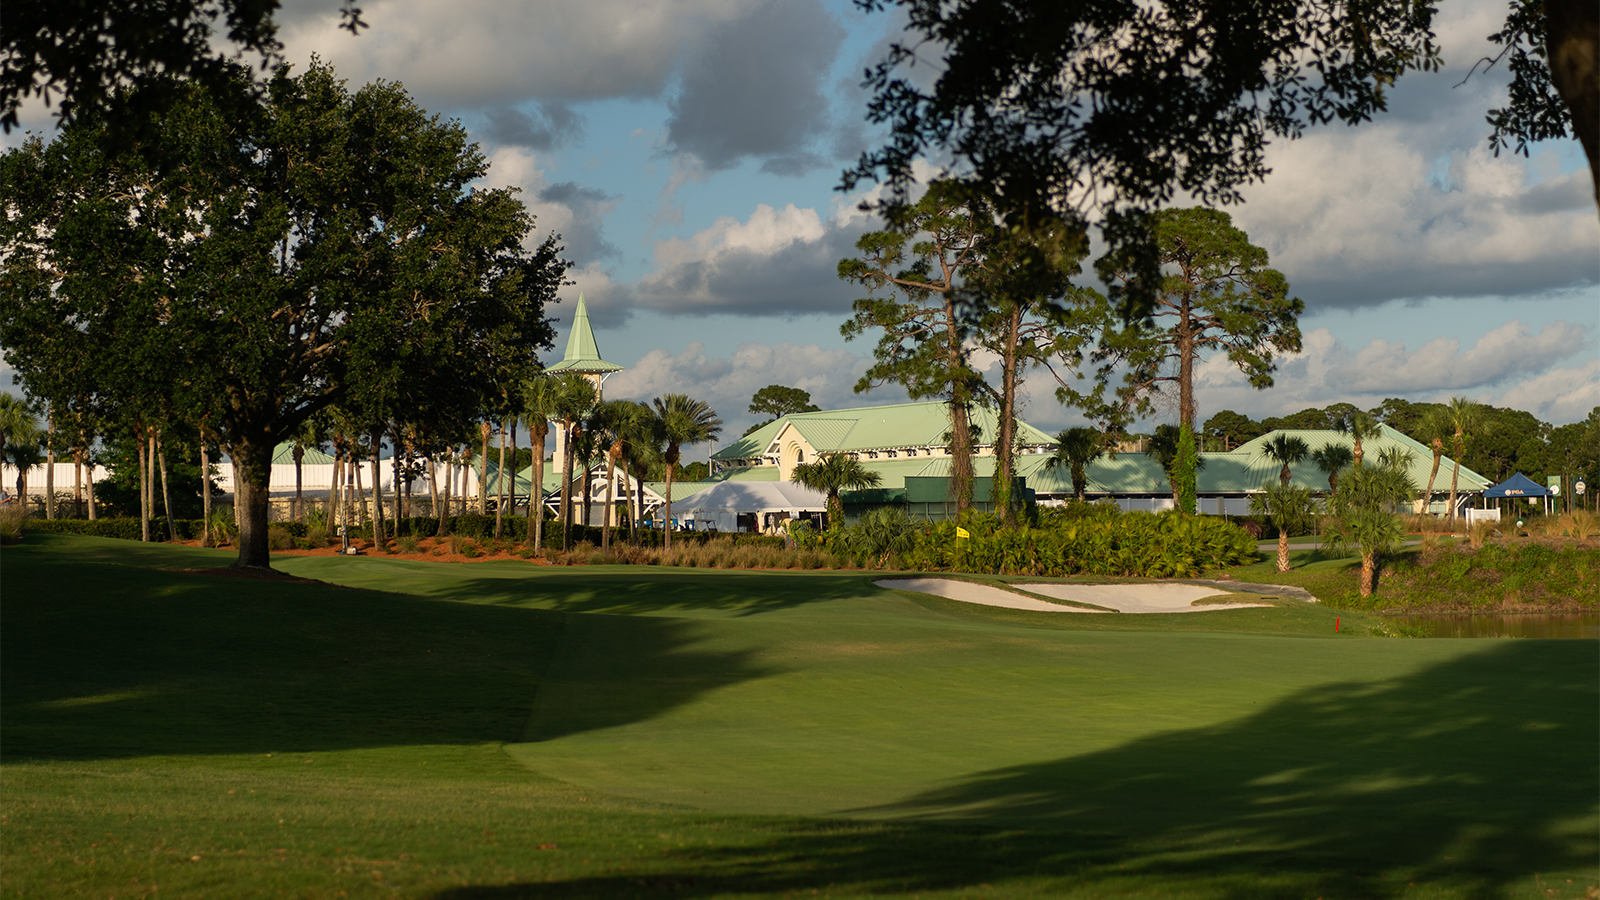 PGA Golf Club on April 26, 2021 in Port St. Lucie, Florida. (Photo by Montana Pritchard/PGA of America)